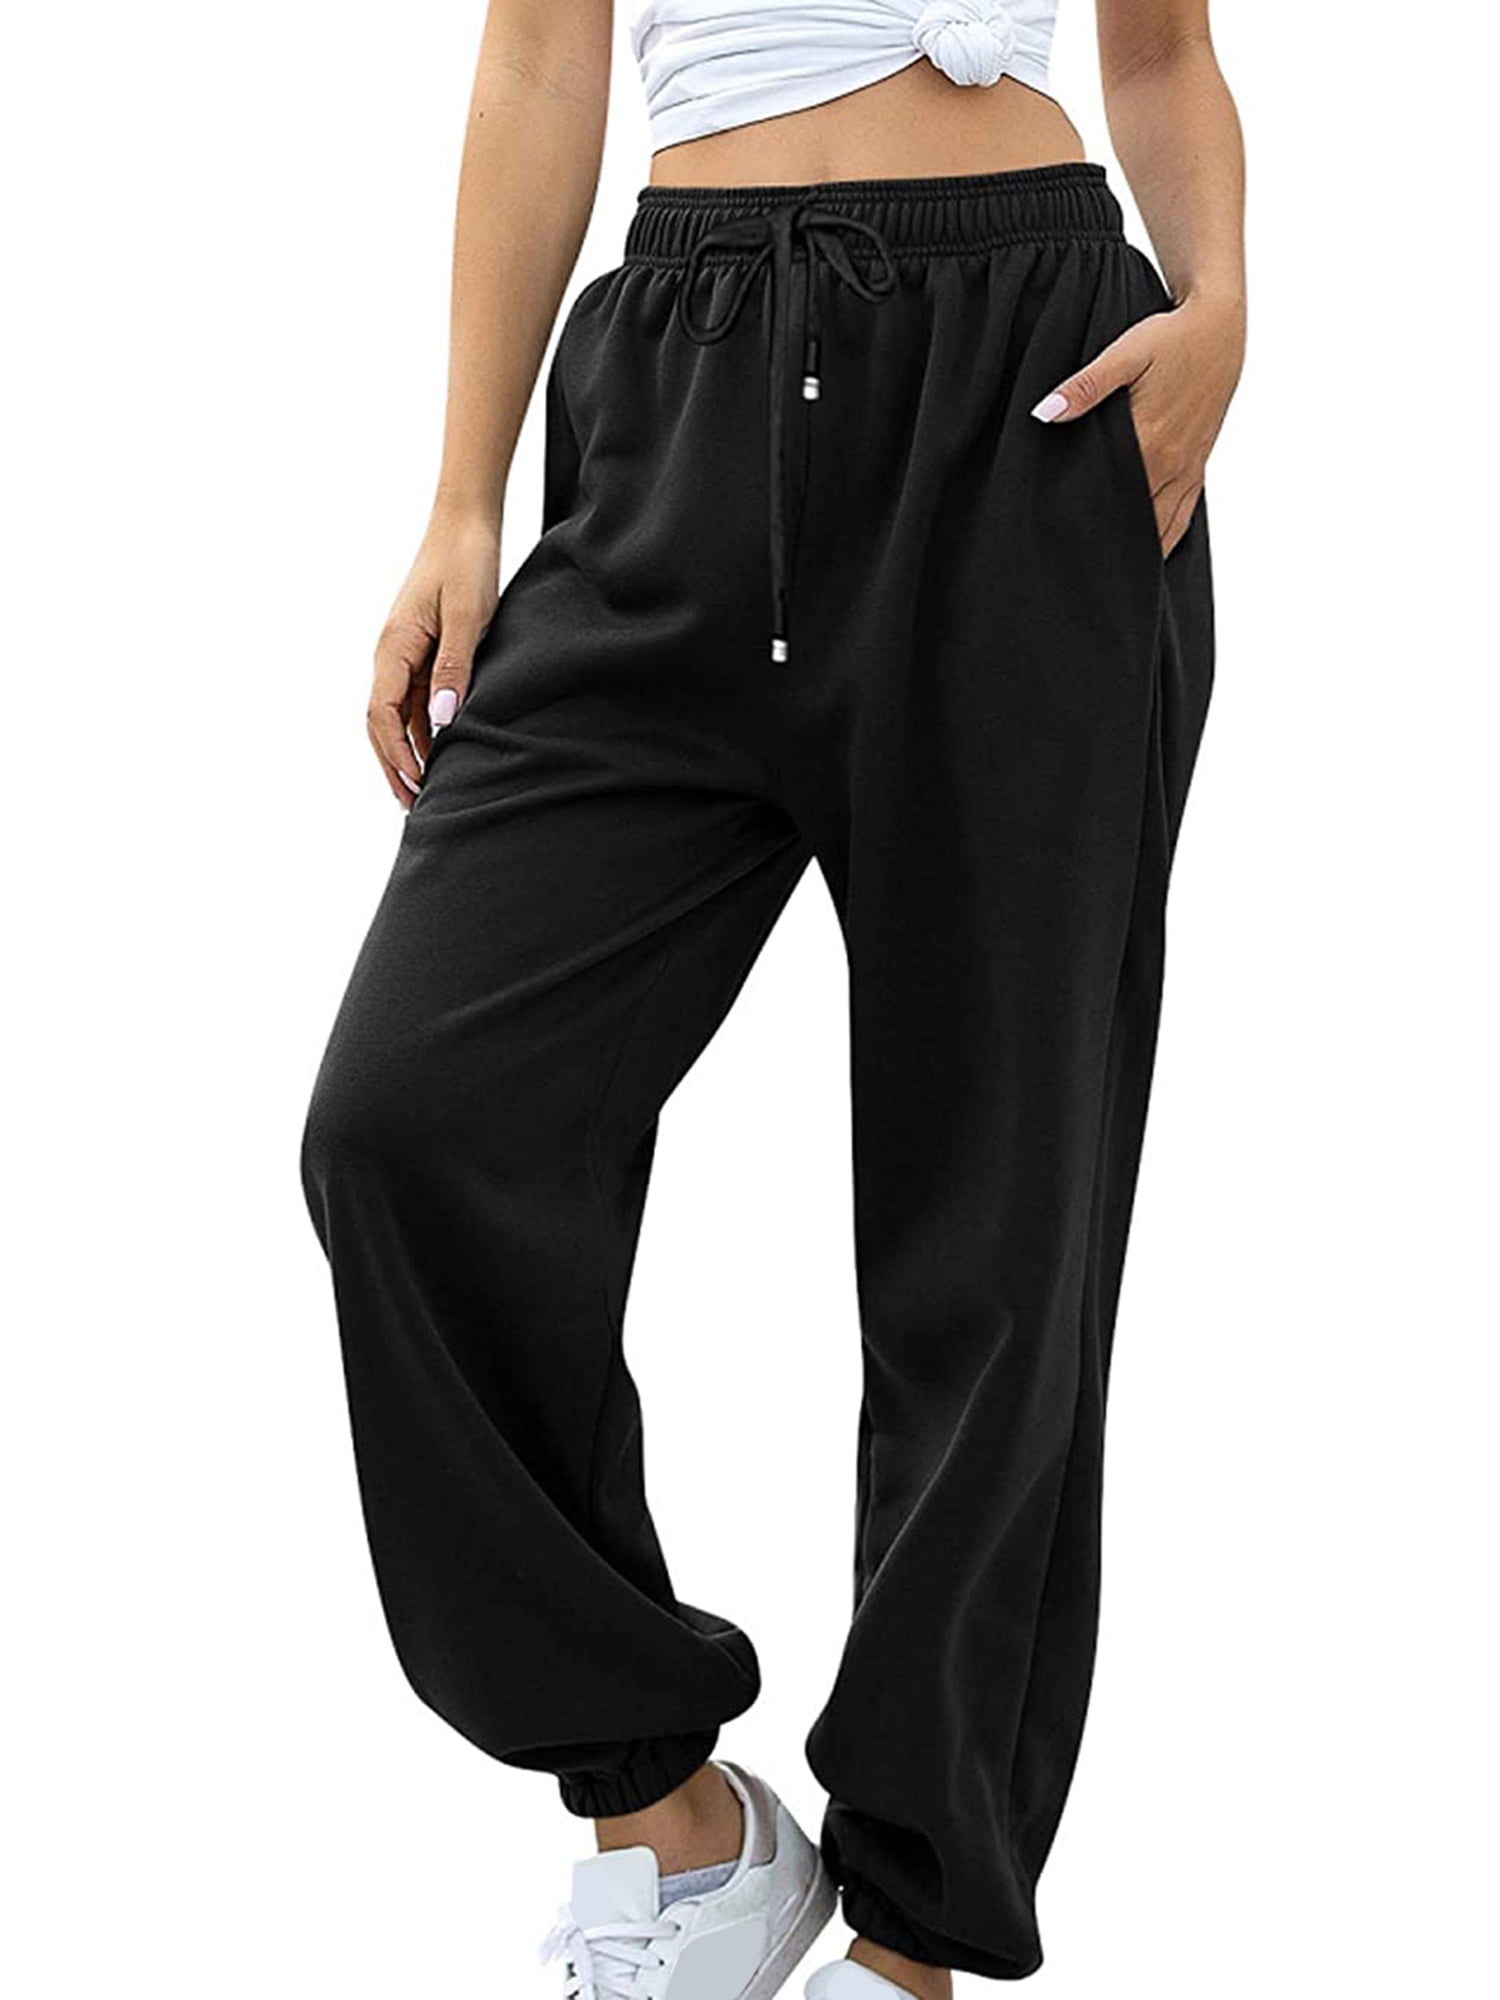 JYYYBF Womens Casual Comfy Sweatpants High Waisted Drawstring Sweat Pants  Cinch Bottom Workout Joggers Trousers with Pocket Black XXL